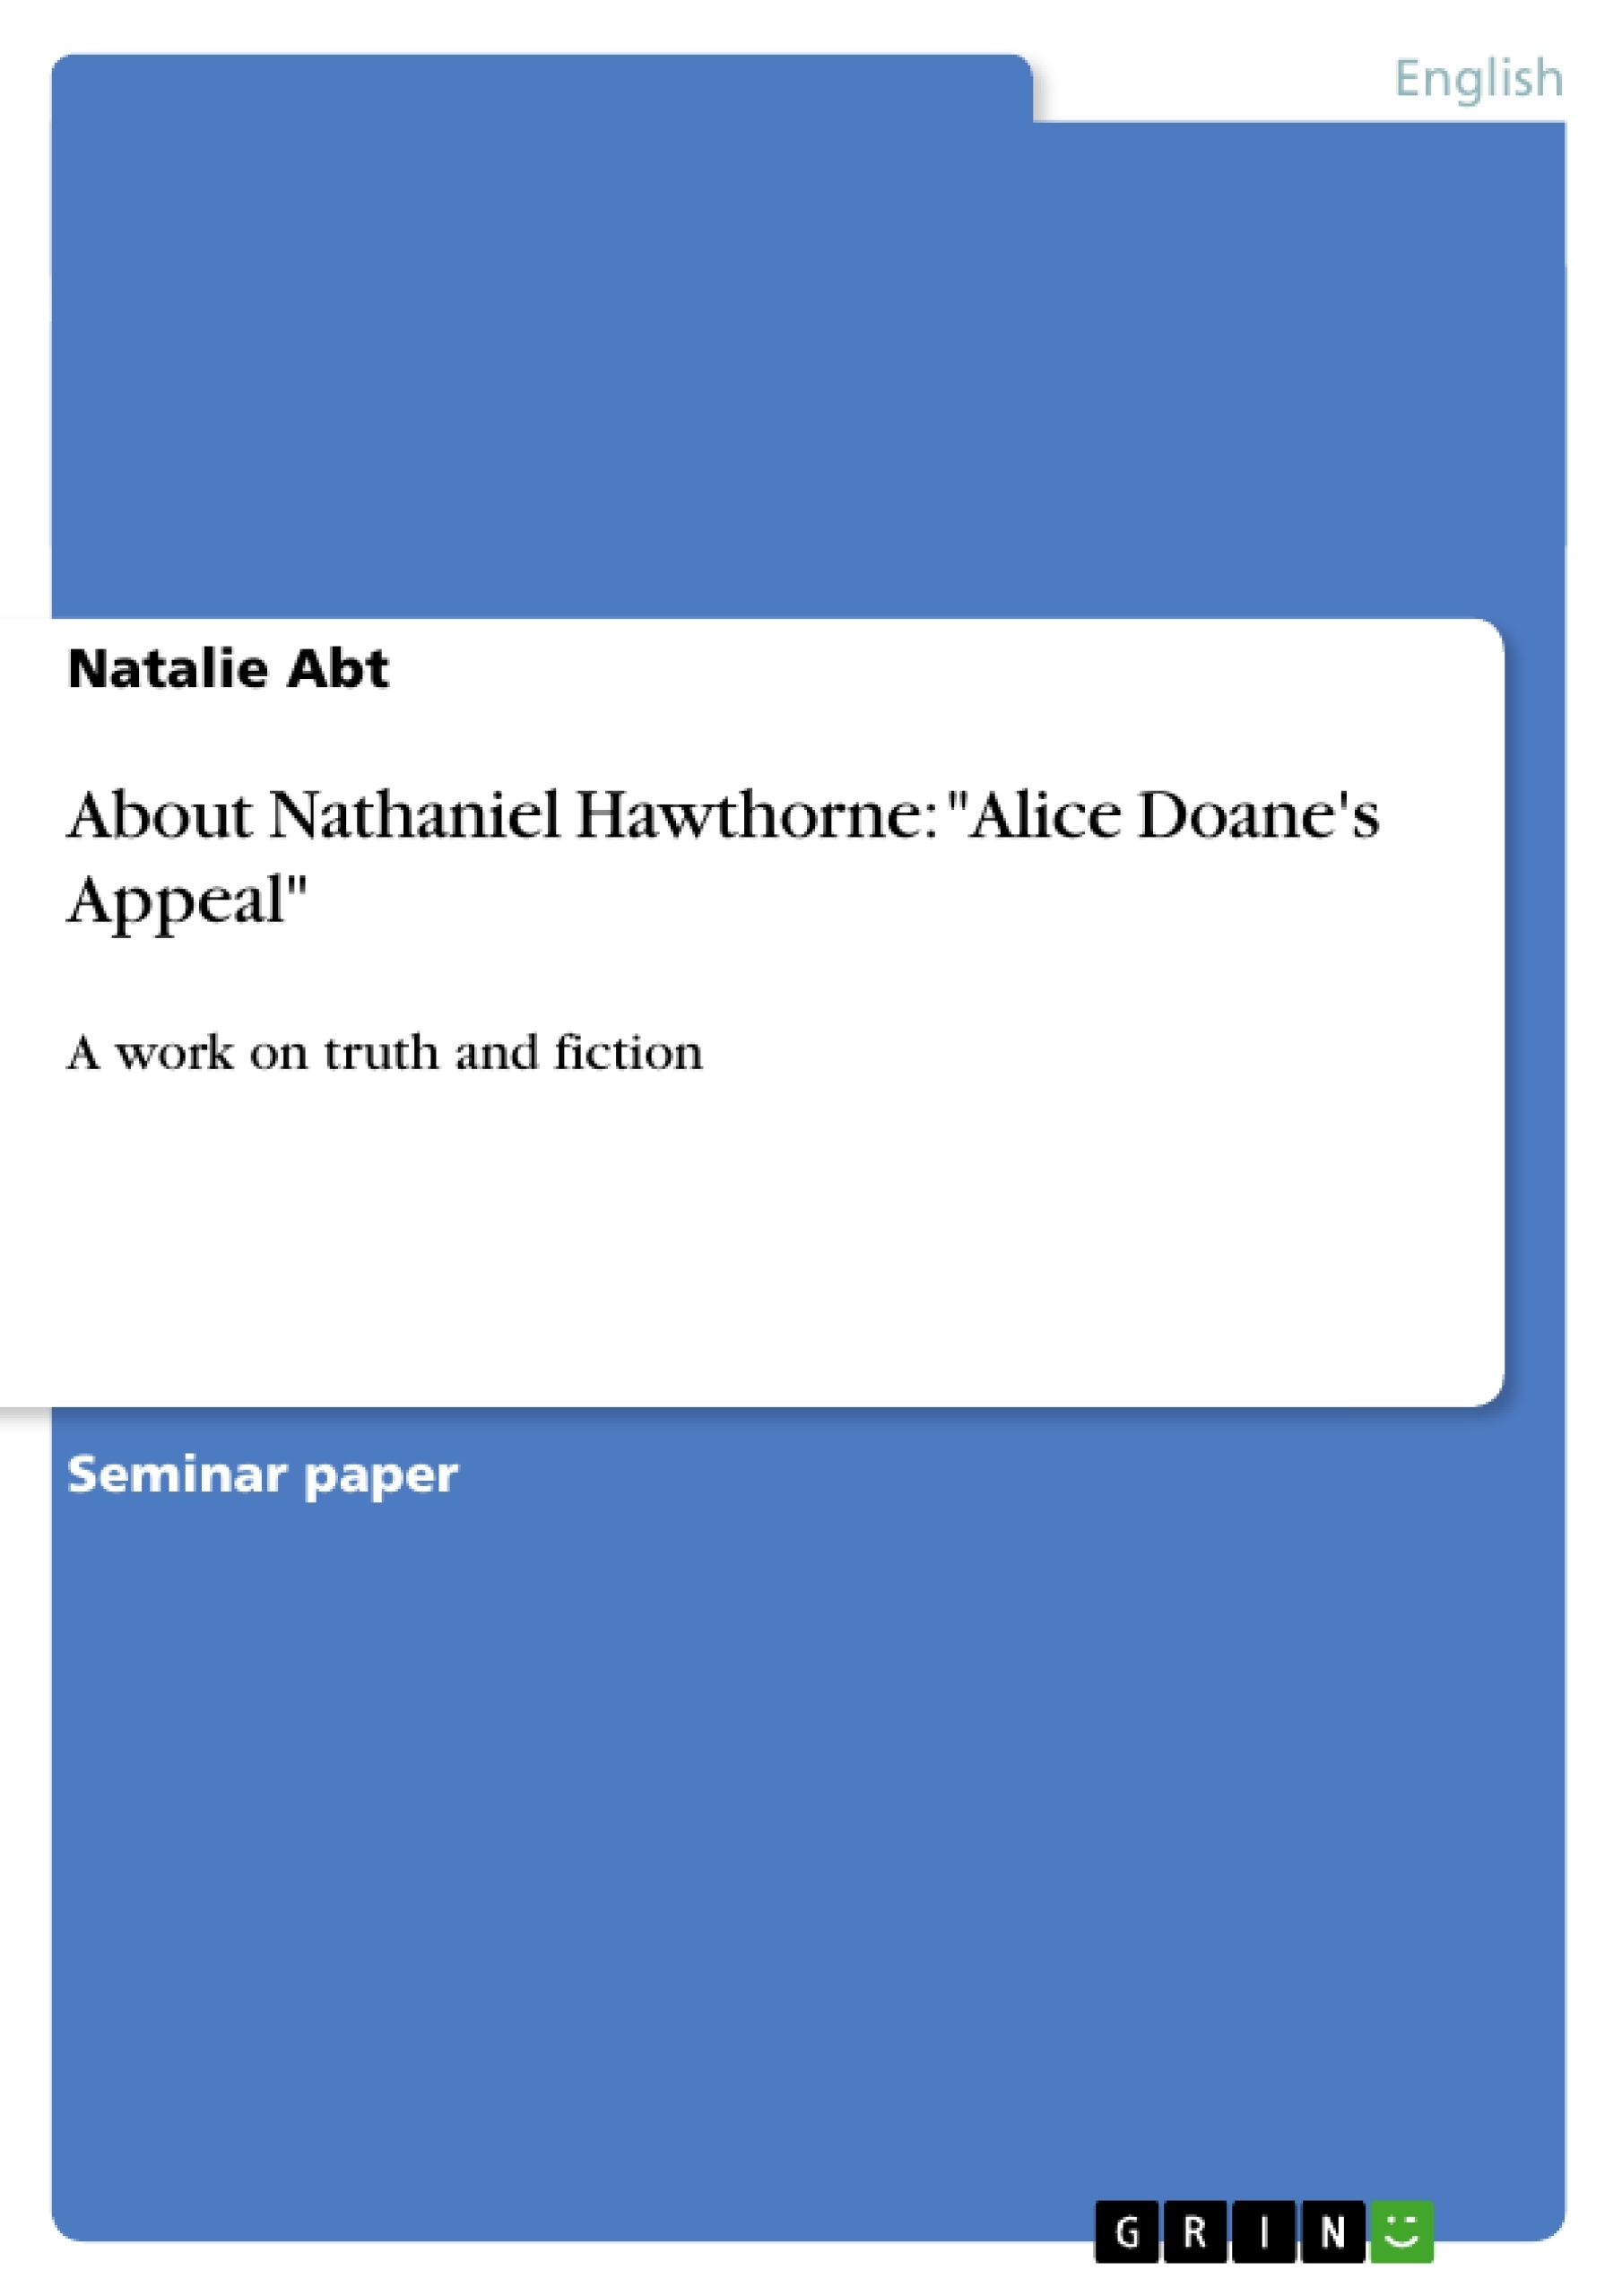 Title: About Nathaniel Hawthorne: "Alice Doane's Appeal"